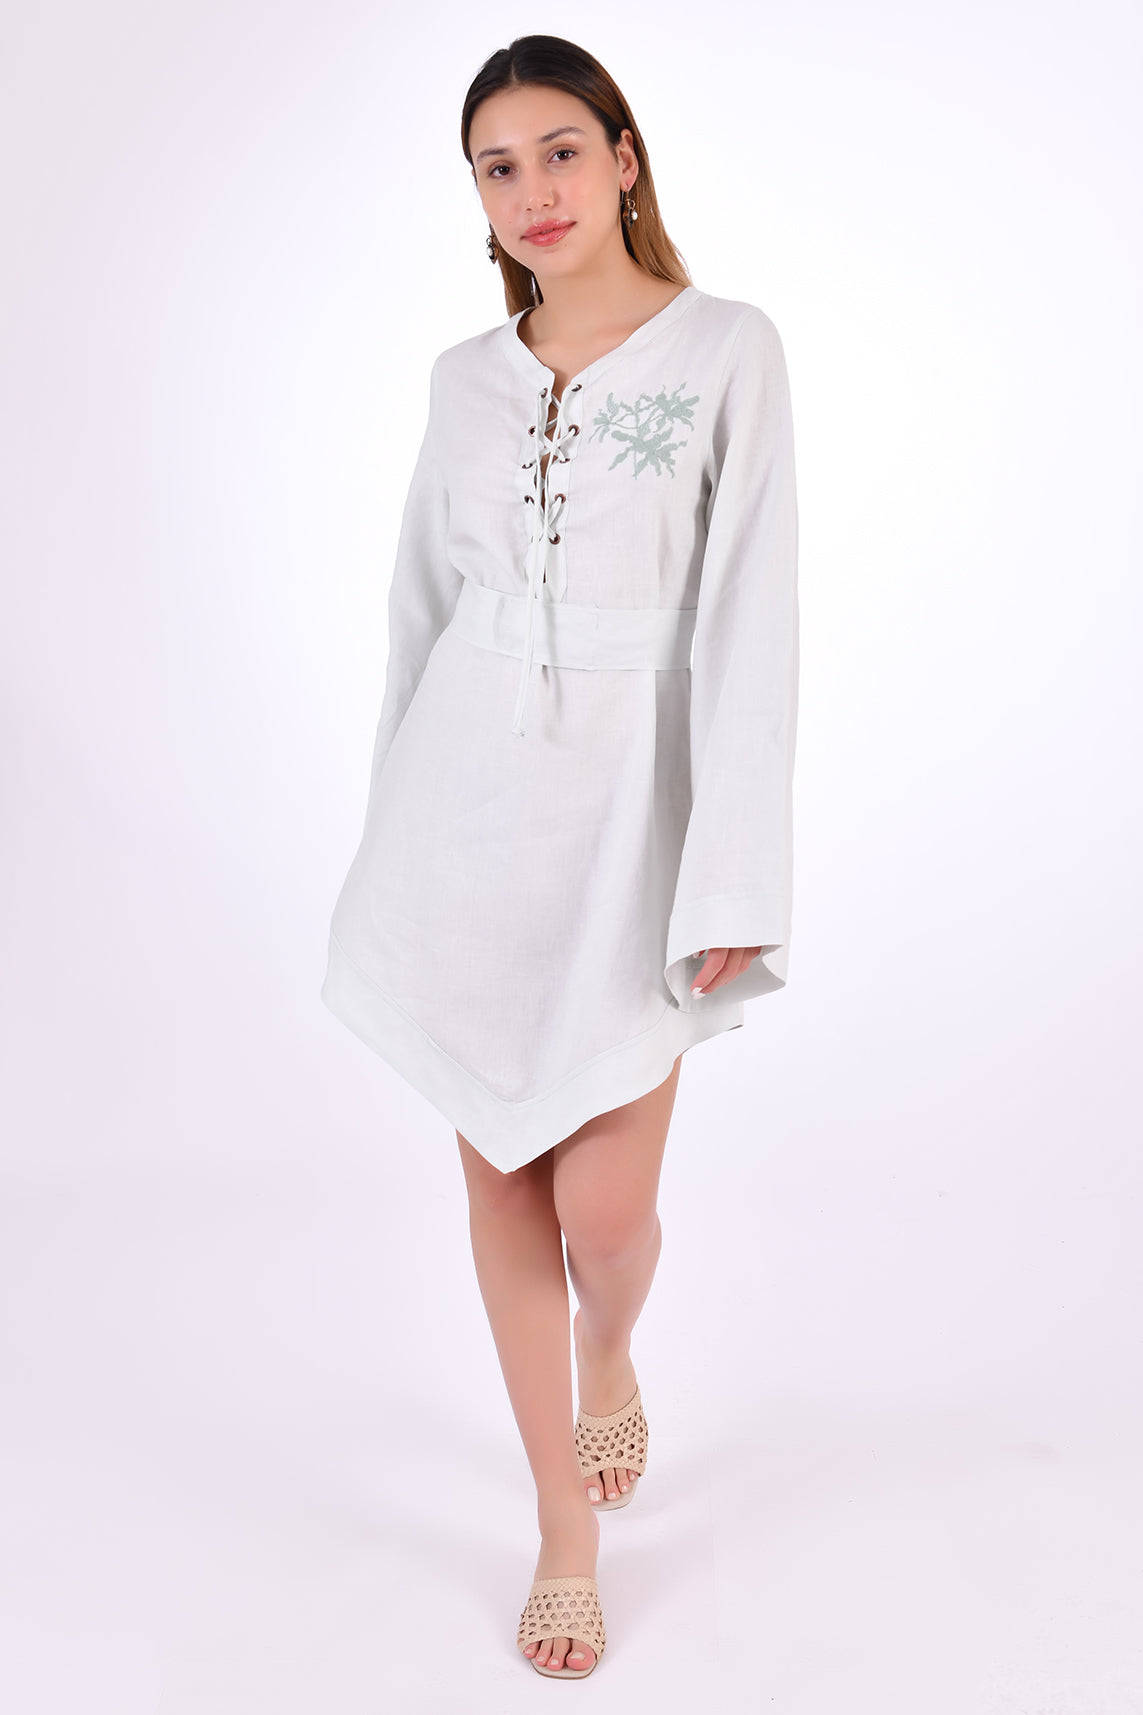 Fanm Mon Boze Dress, Front View alternative. Kaftan Style Linen Dress with wide kimono embroidered sleeves and handkerchief hem and tie front.  Easy slip-on wear,  mini length loose fit dress. 